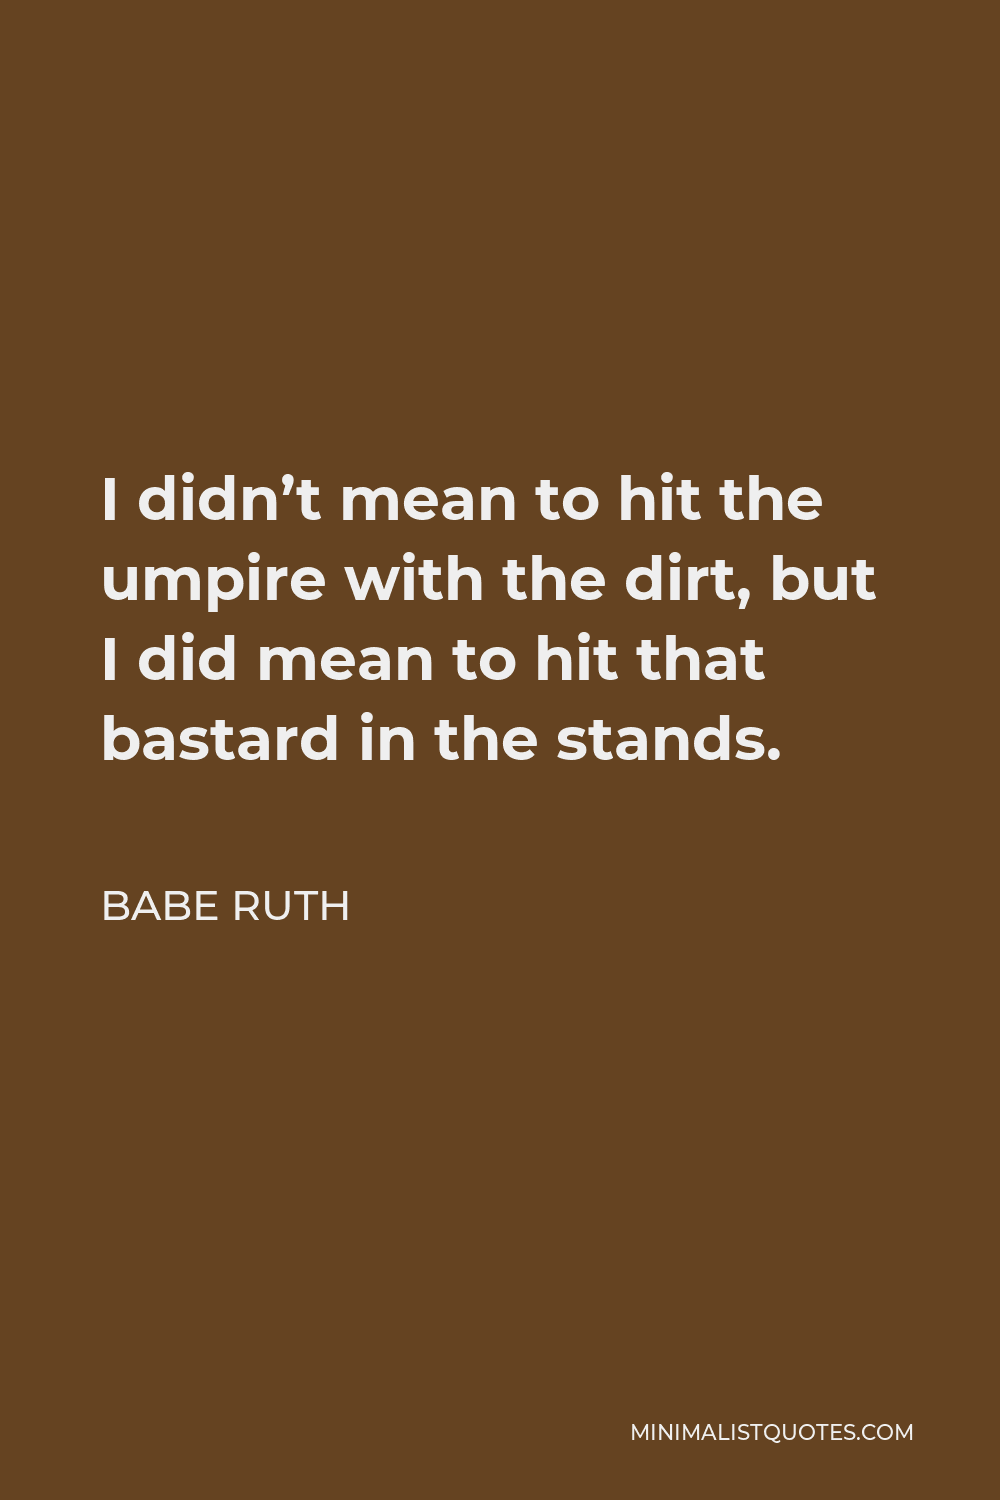 Babe Ruth Quote - I didn’t mean to hit the umpire with the dirt, but I did mean to hit that bastard in the stands.